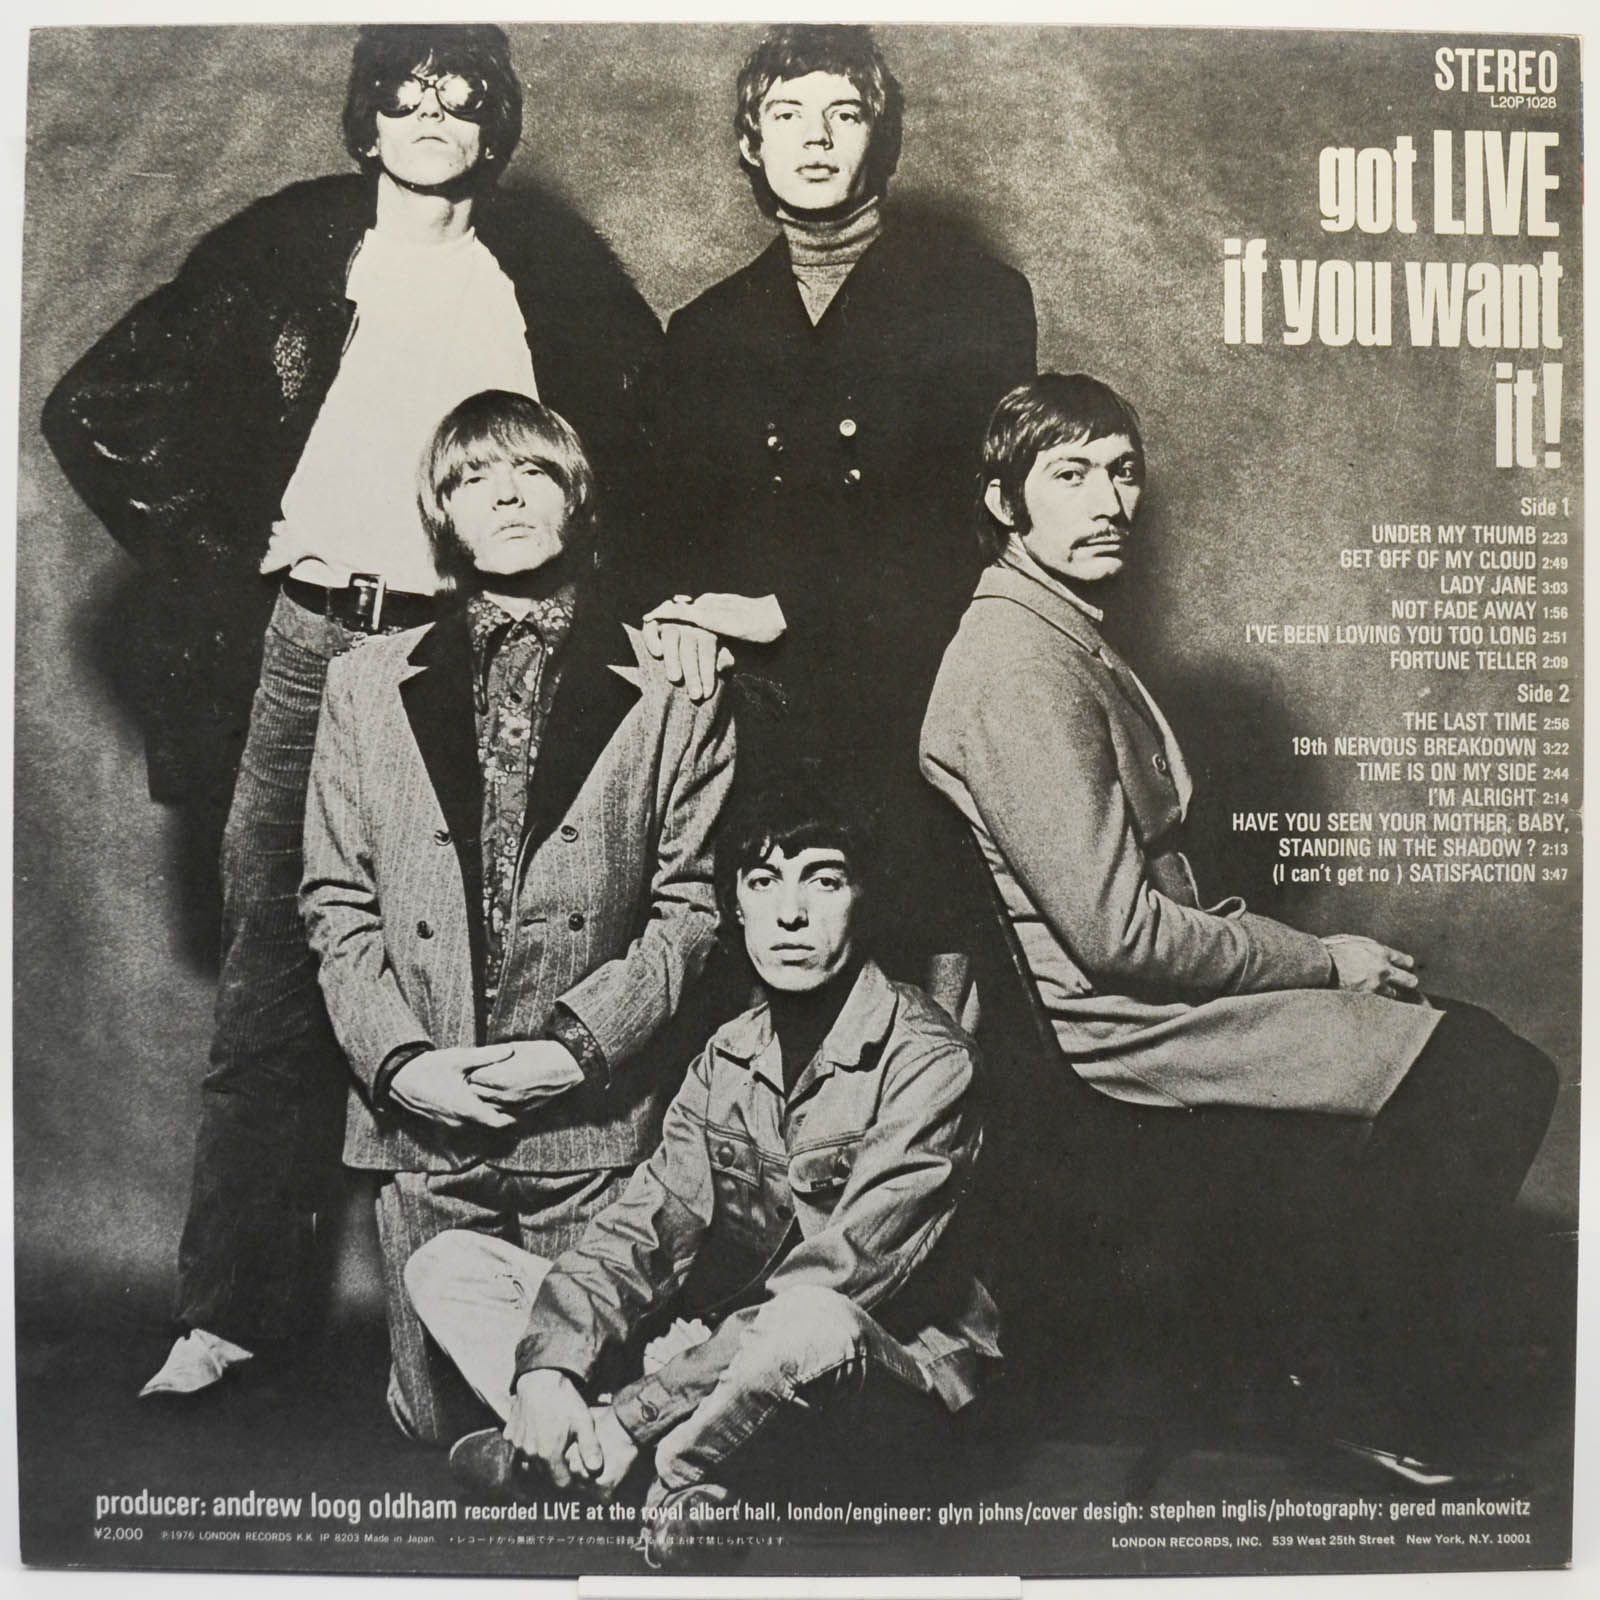 Rolling Stones — Got Live If You Want It!, 1966